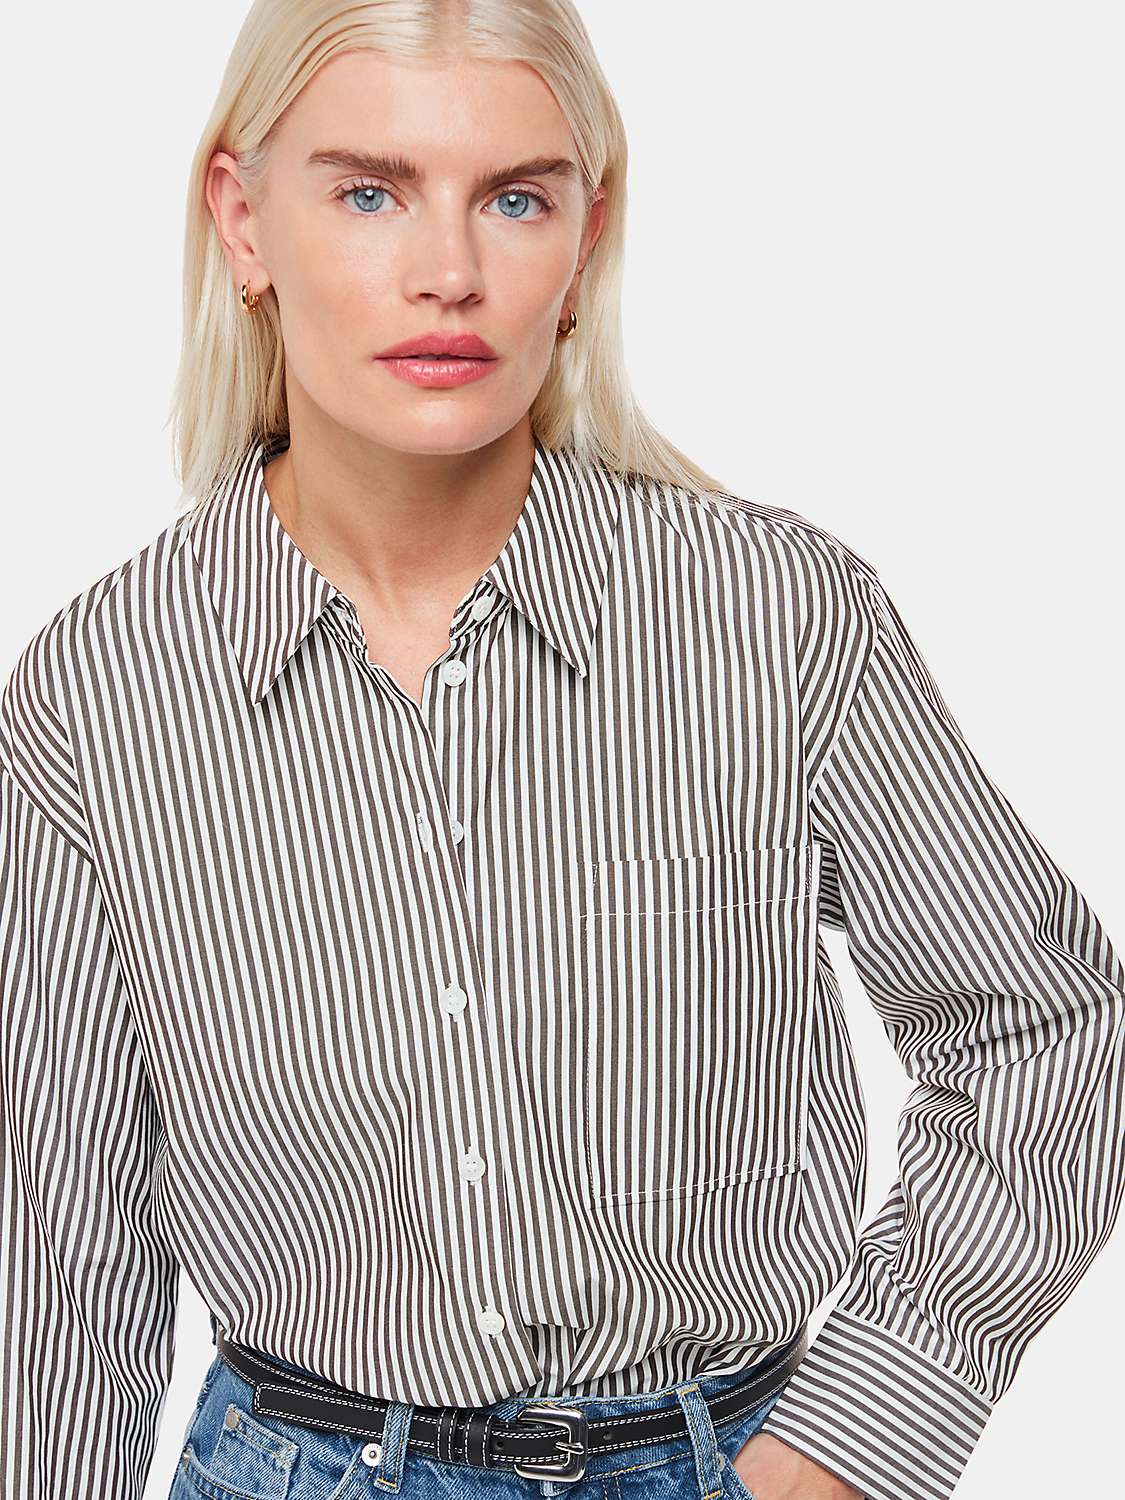 Buy Whistles Petite Striped Relaxed Fit Shirt, Black/White Online at johnlewis.com